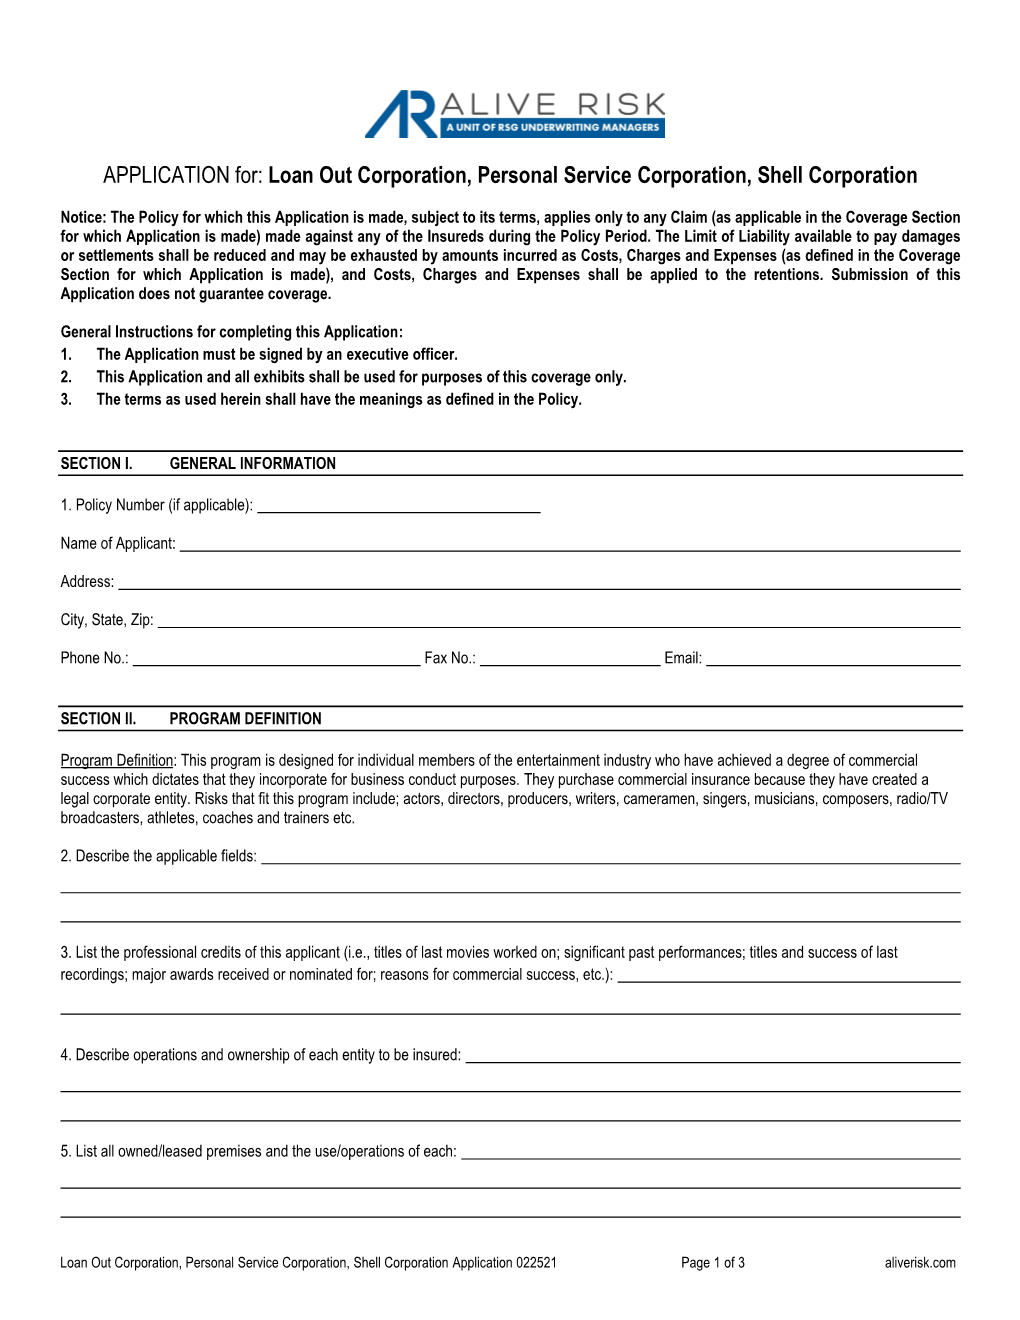 Loan Out, Personal Service, Shell Corporation Insurance Application